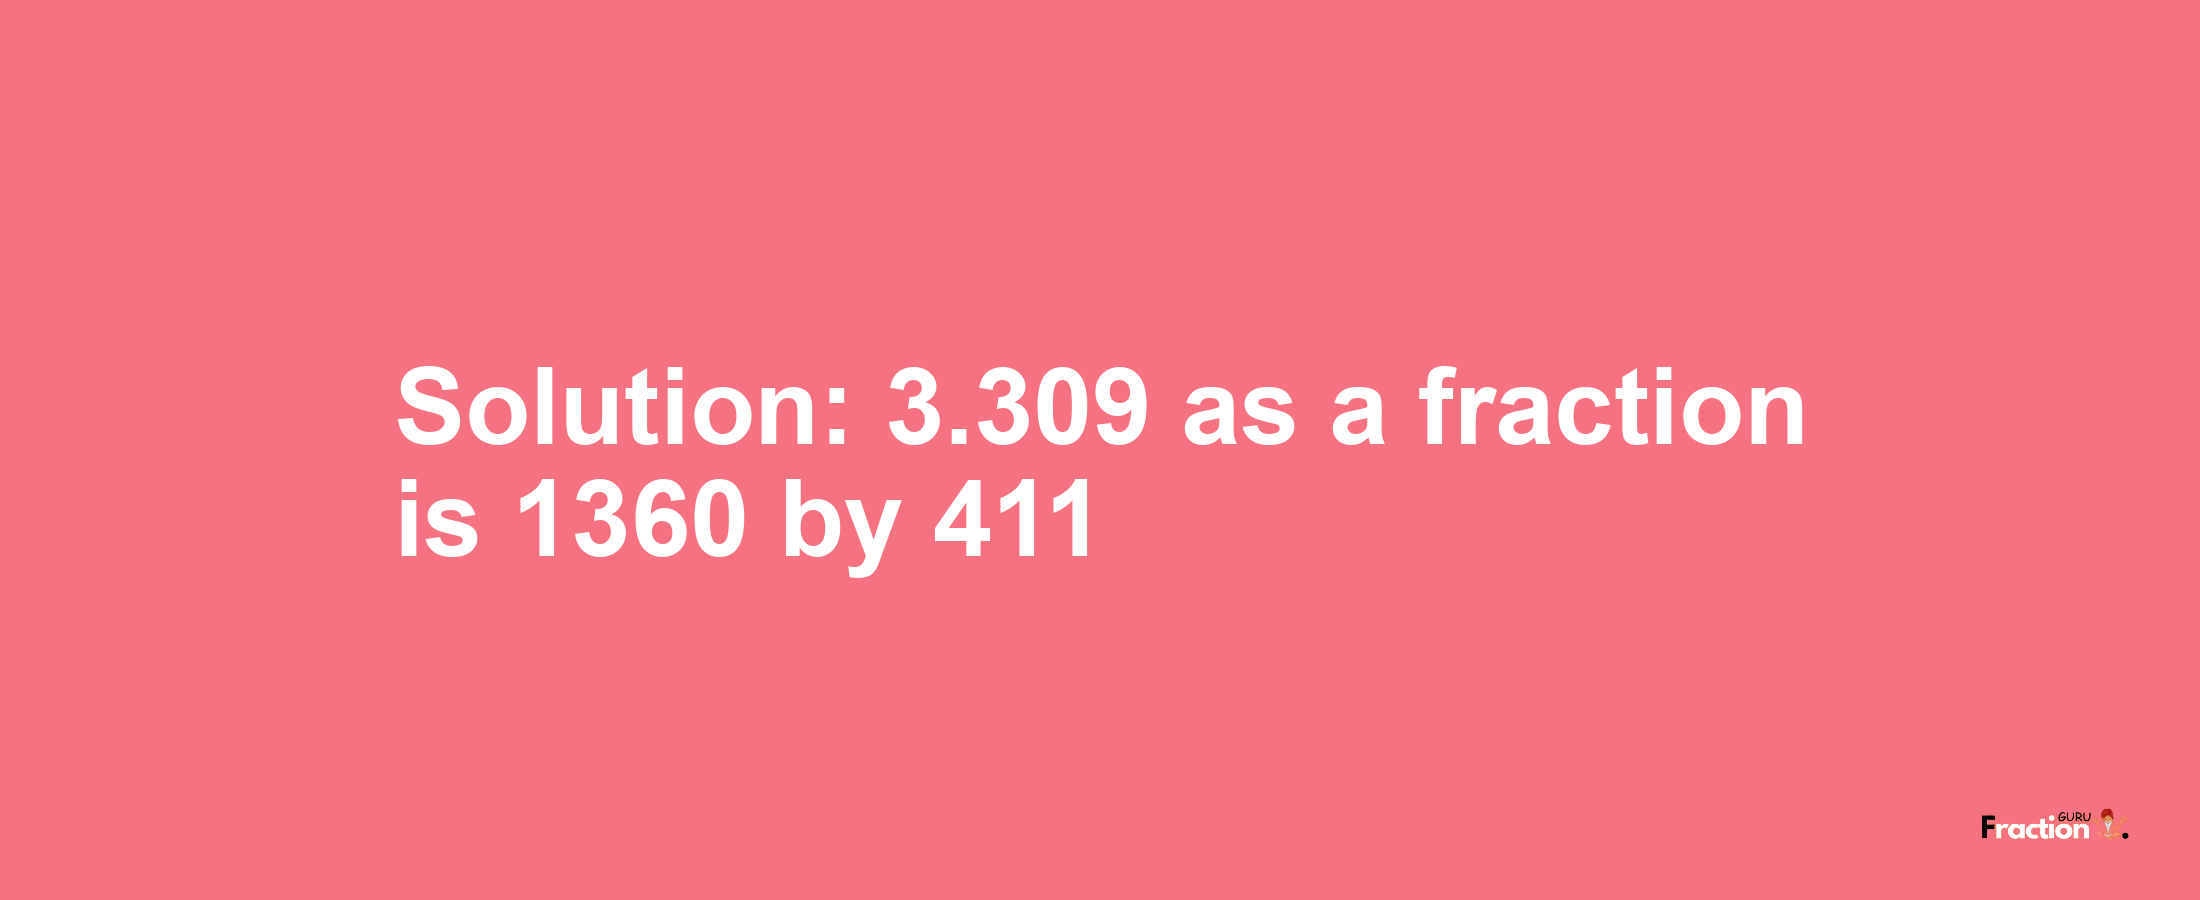 Solution:3.309 as a fraction is 1360/411